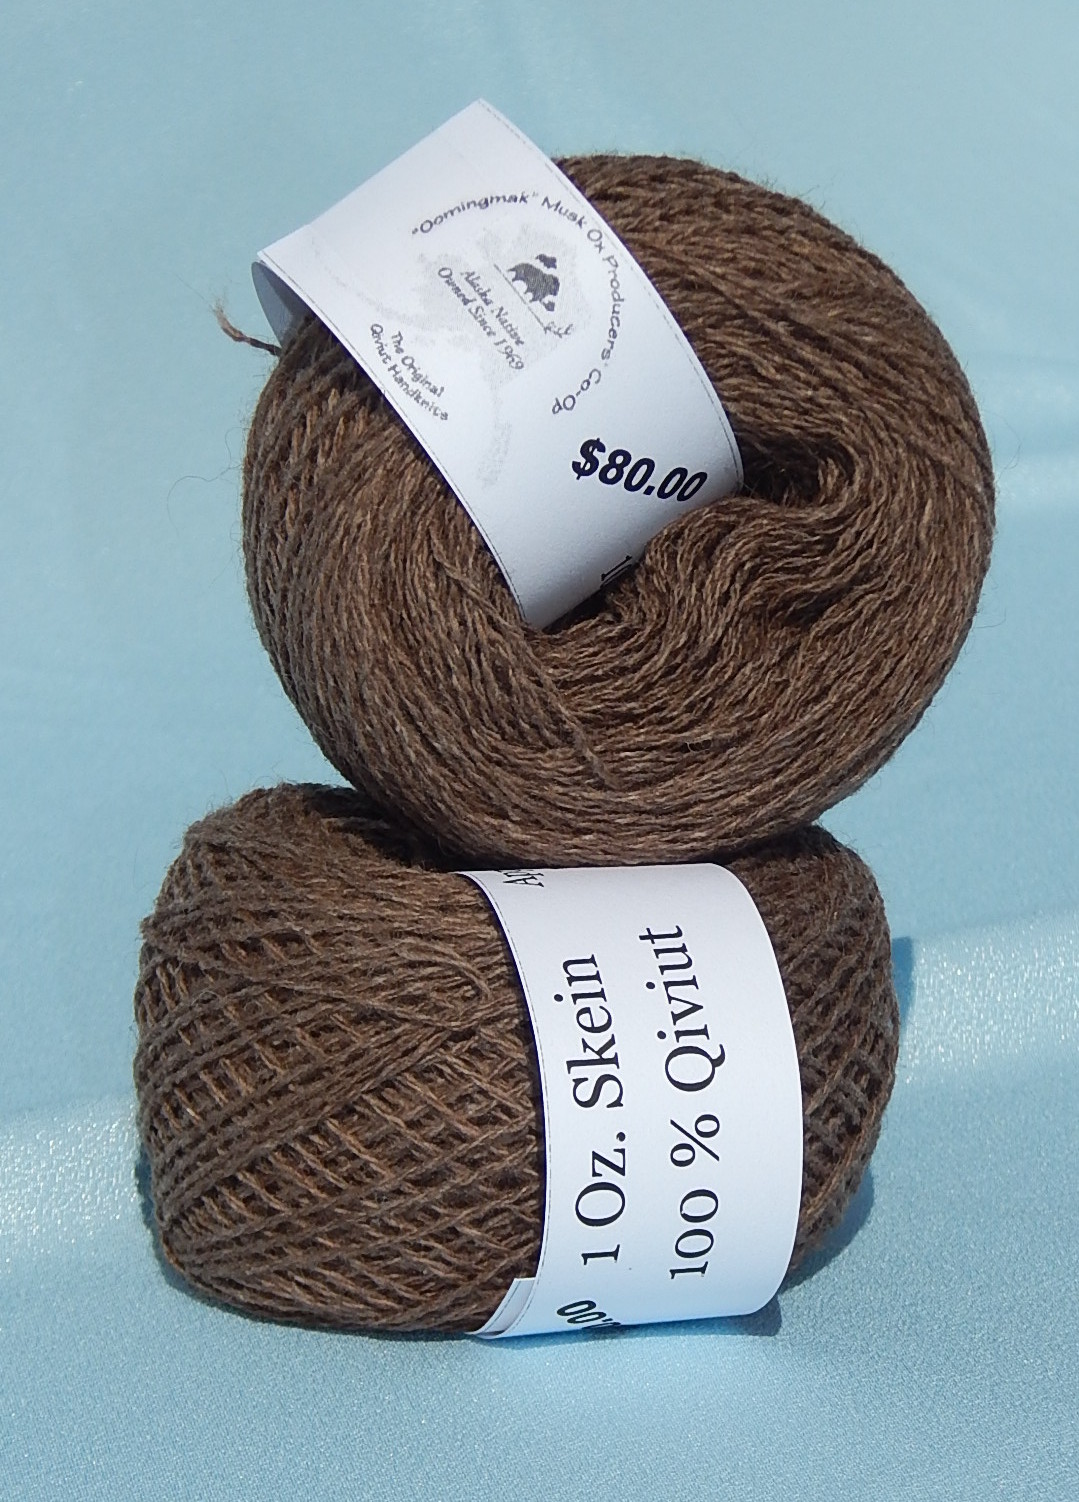 1 oz. Lace weight Skein of 100% Qiviut (click to enlarge)